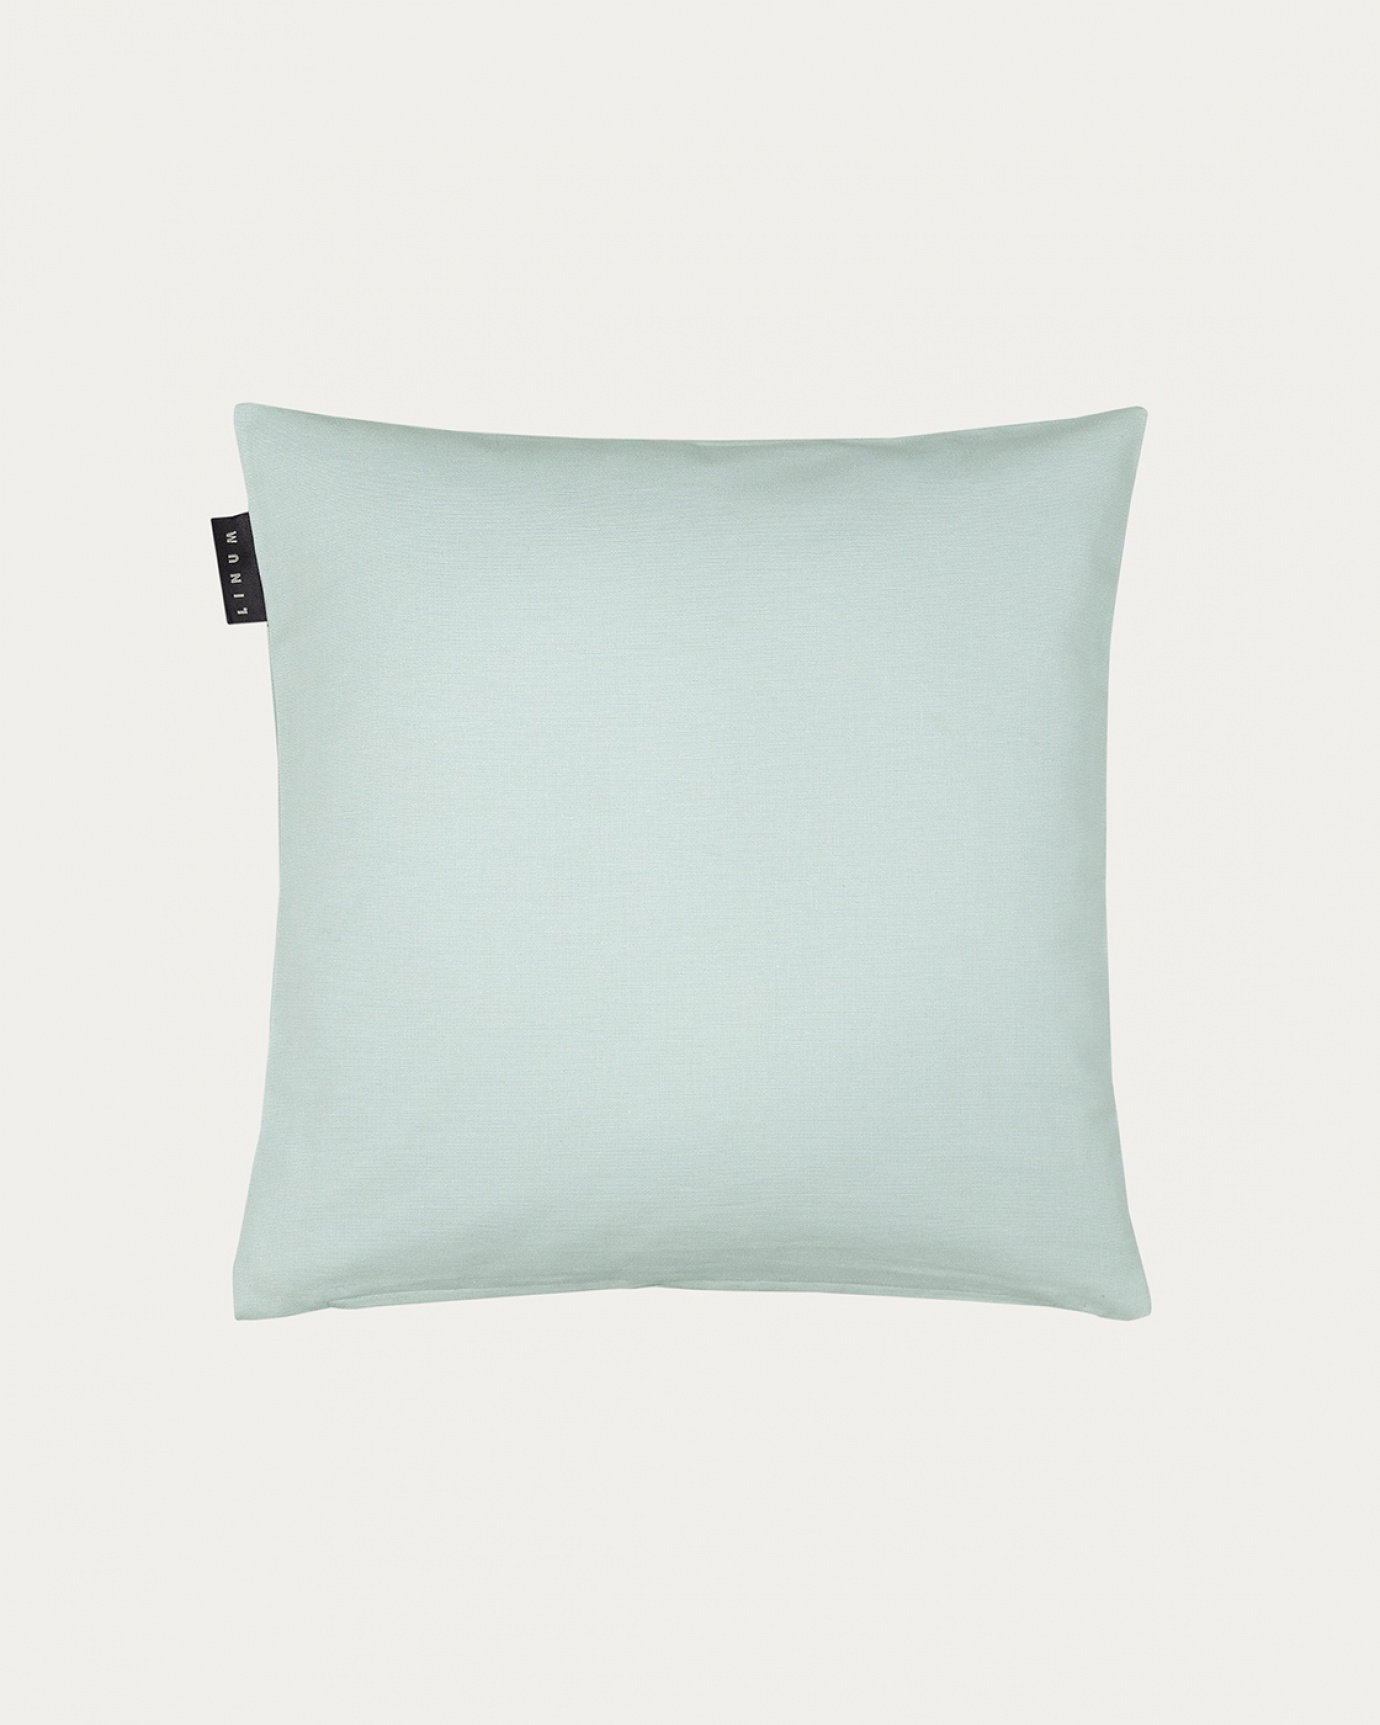 Product image light ice green ANNABELL cushion cover made of soft cotton from LINUM DESIGN. Size 40x40 cm.